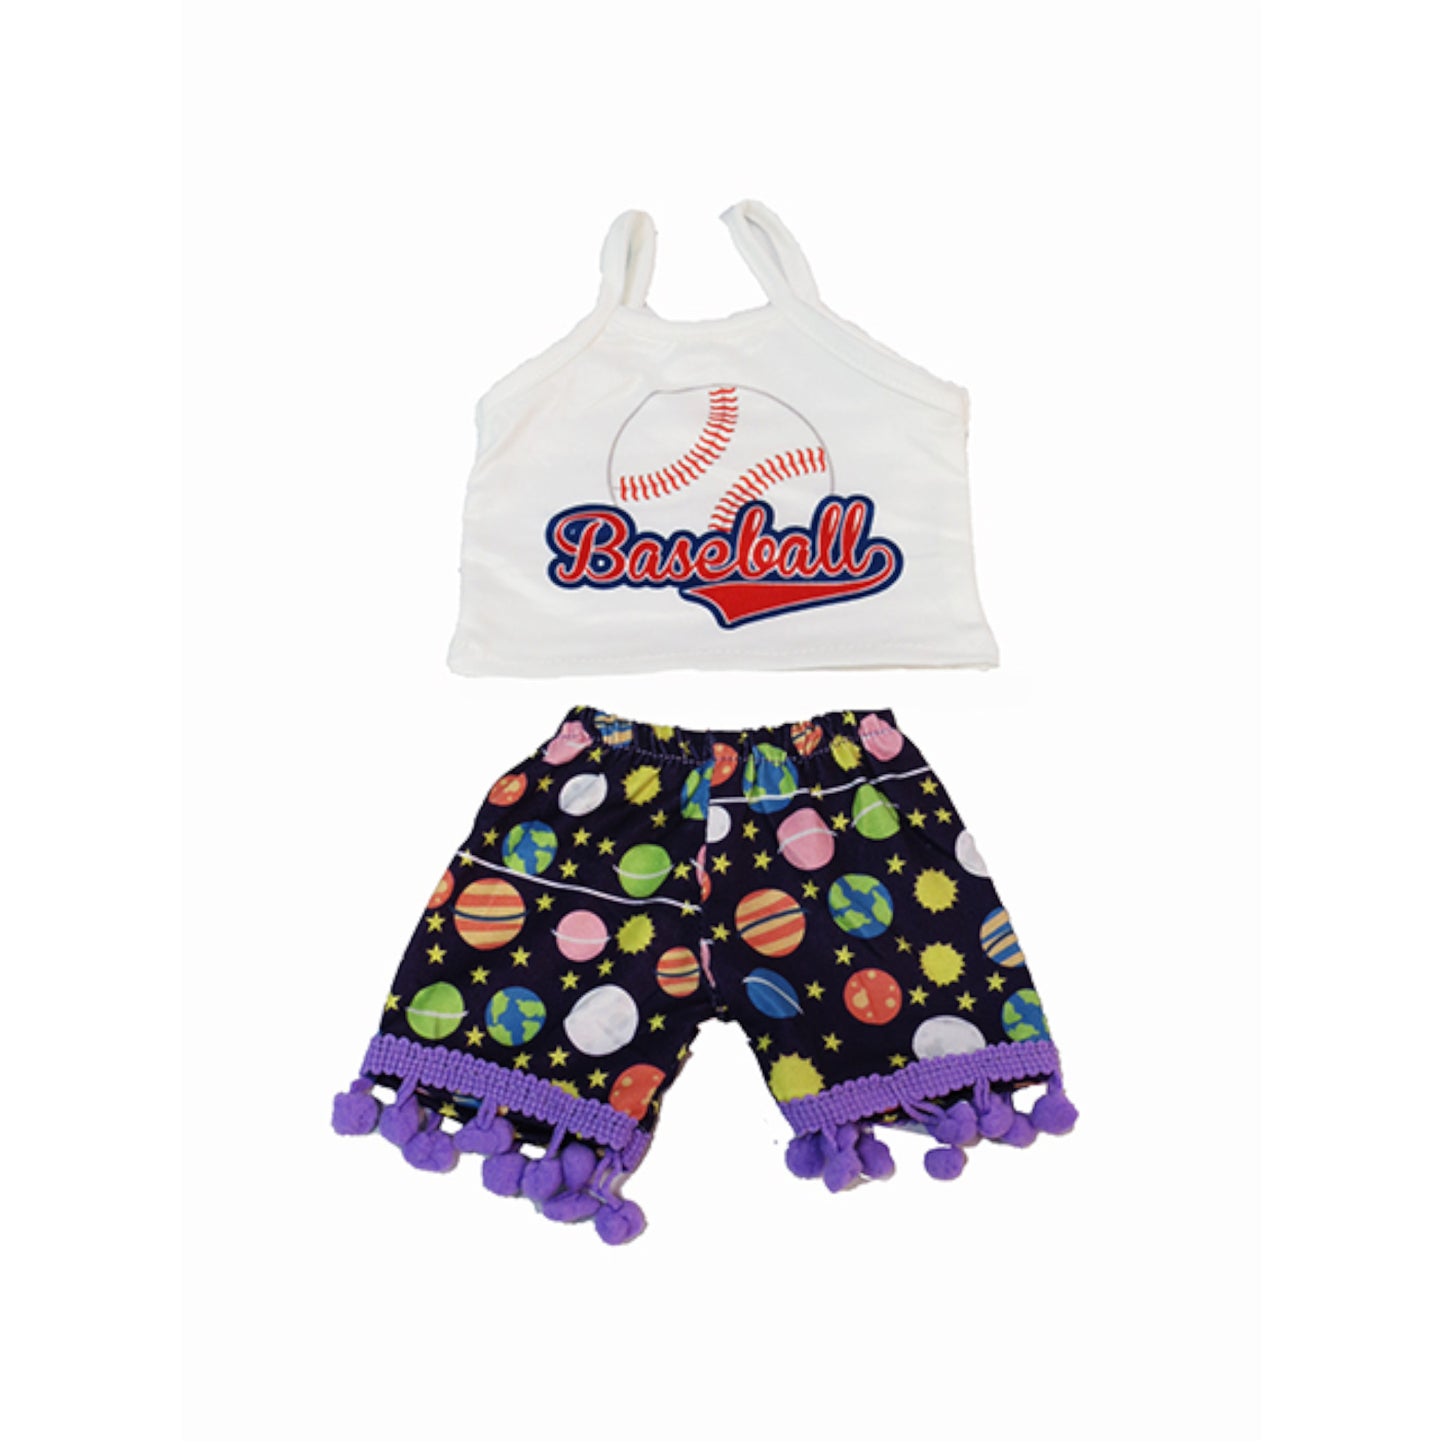 Two Piece Baseball Outfit for 18-inch dolls